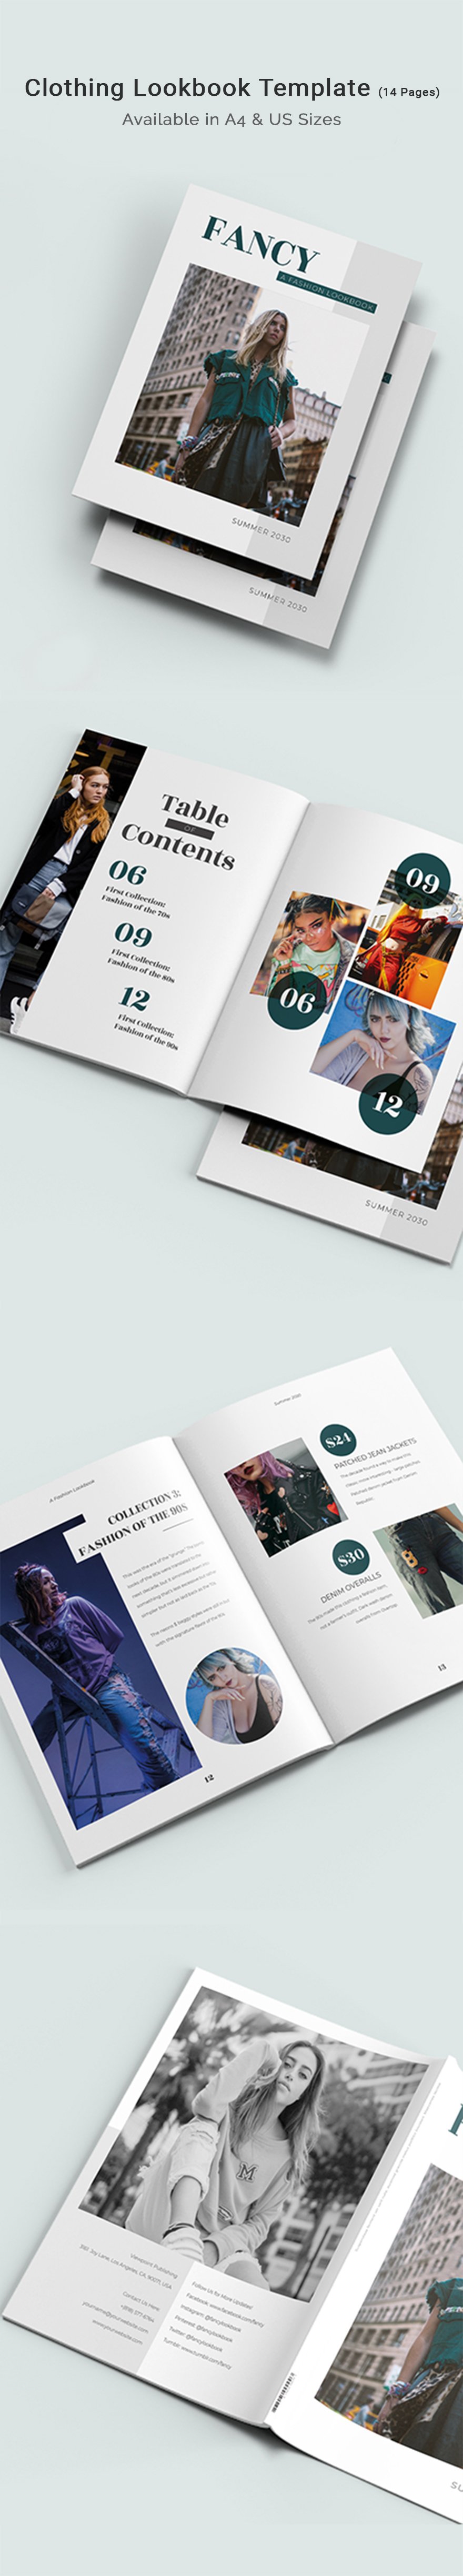 Film Lookbook Template InDesign, Word, Apple Pages, Publisher